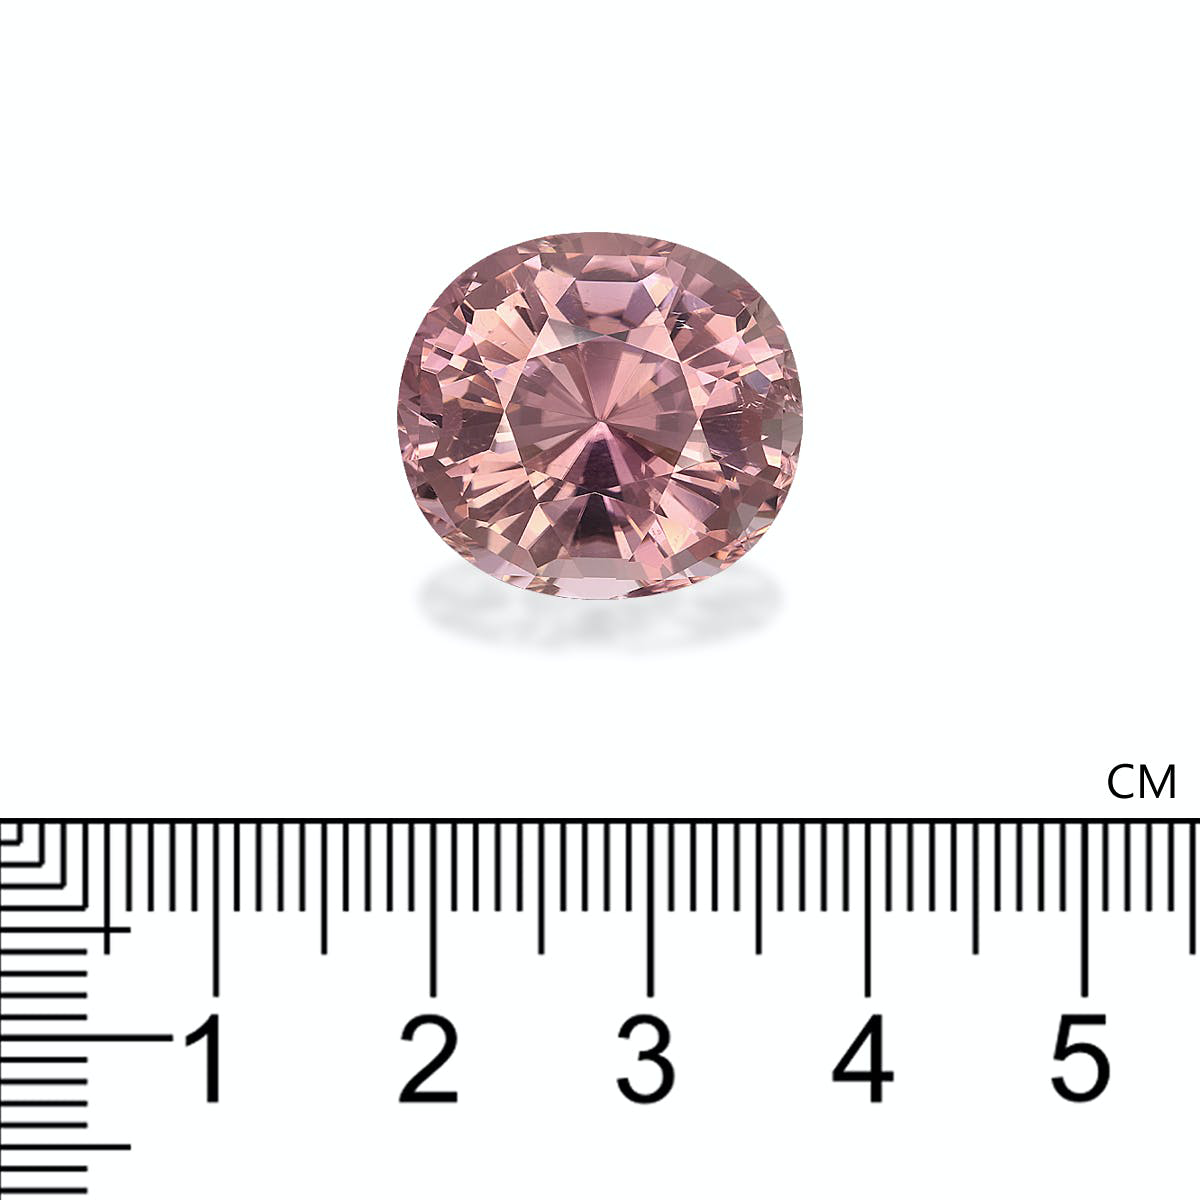 Picture of Salmon Pink Tourmaline 21.87ct - 19x17mm (PT0196)